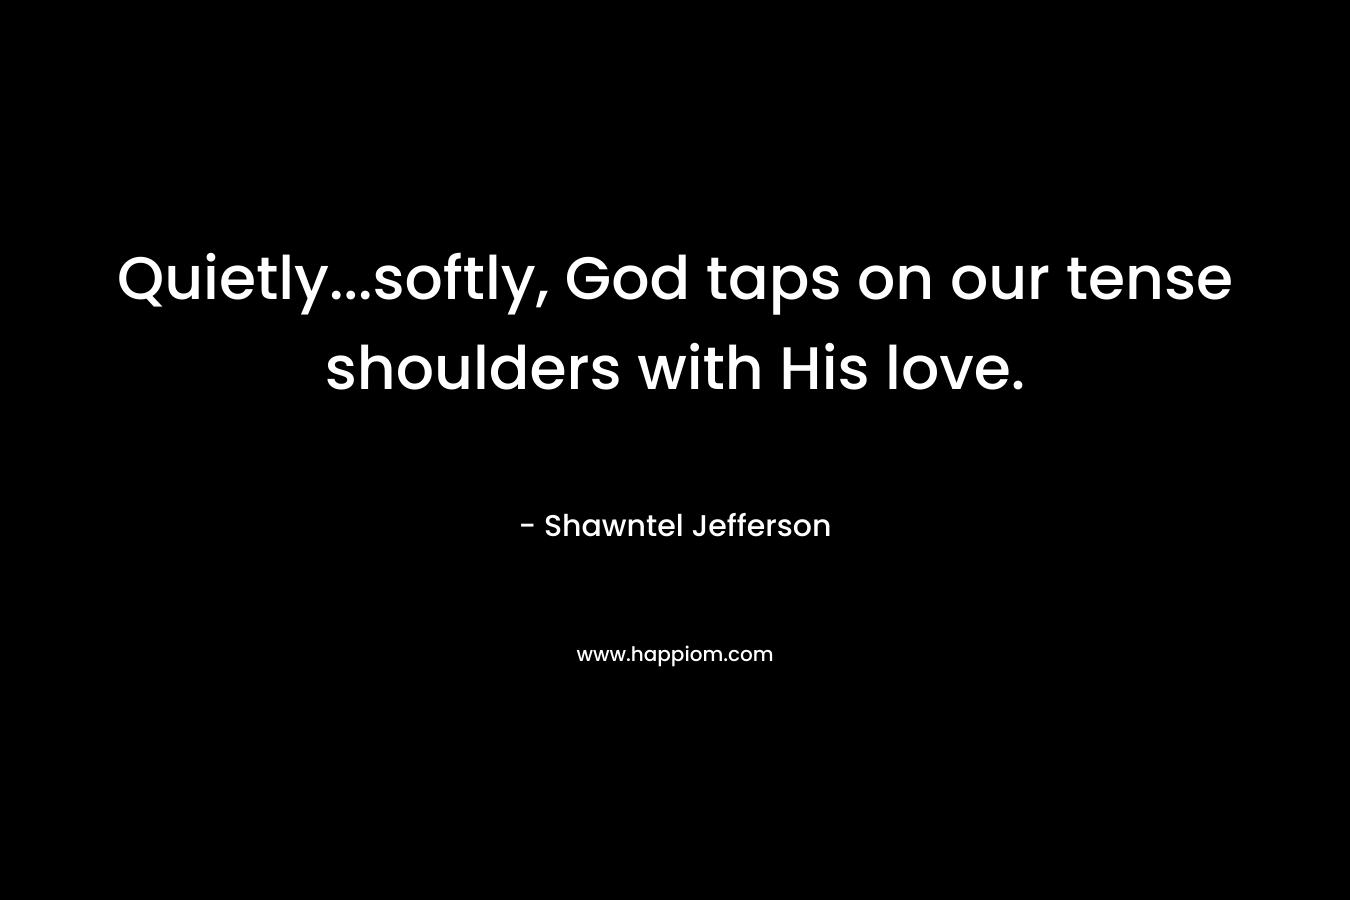 Quietly...softly, God taps on our tense shoulders with His love.